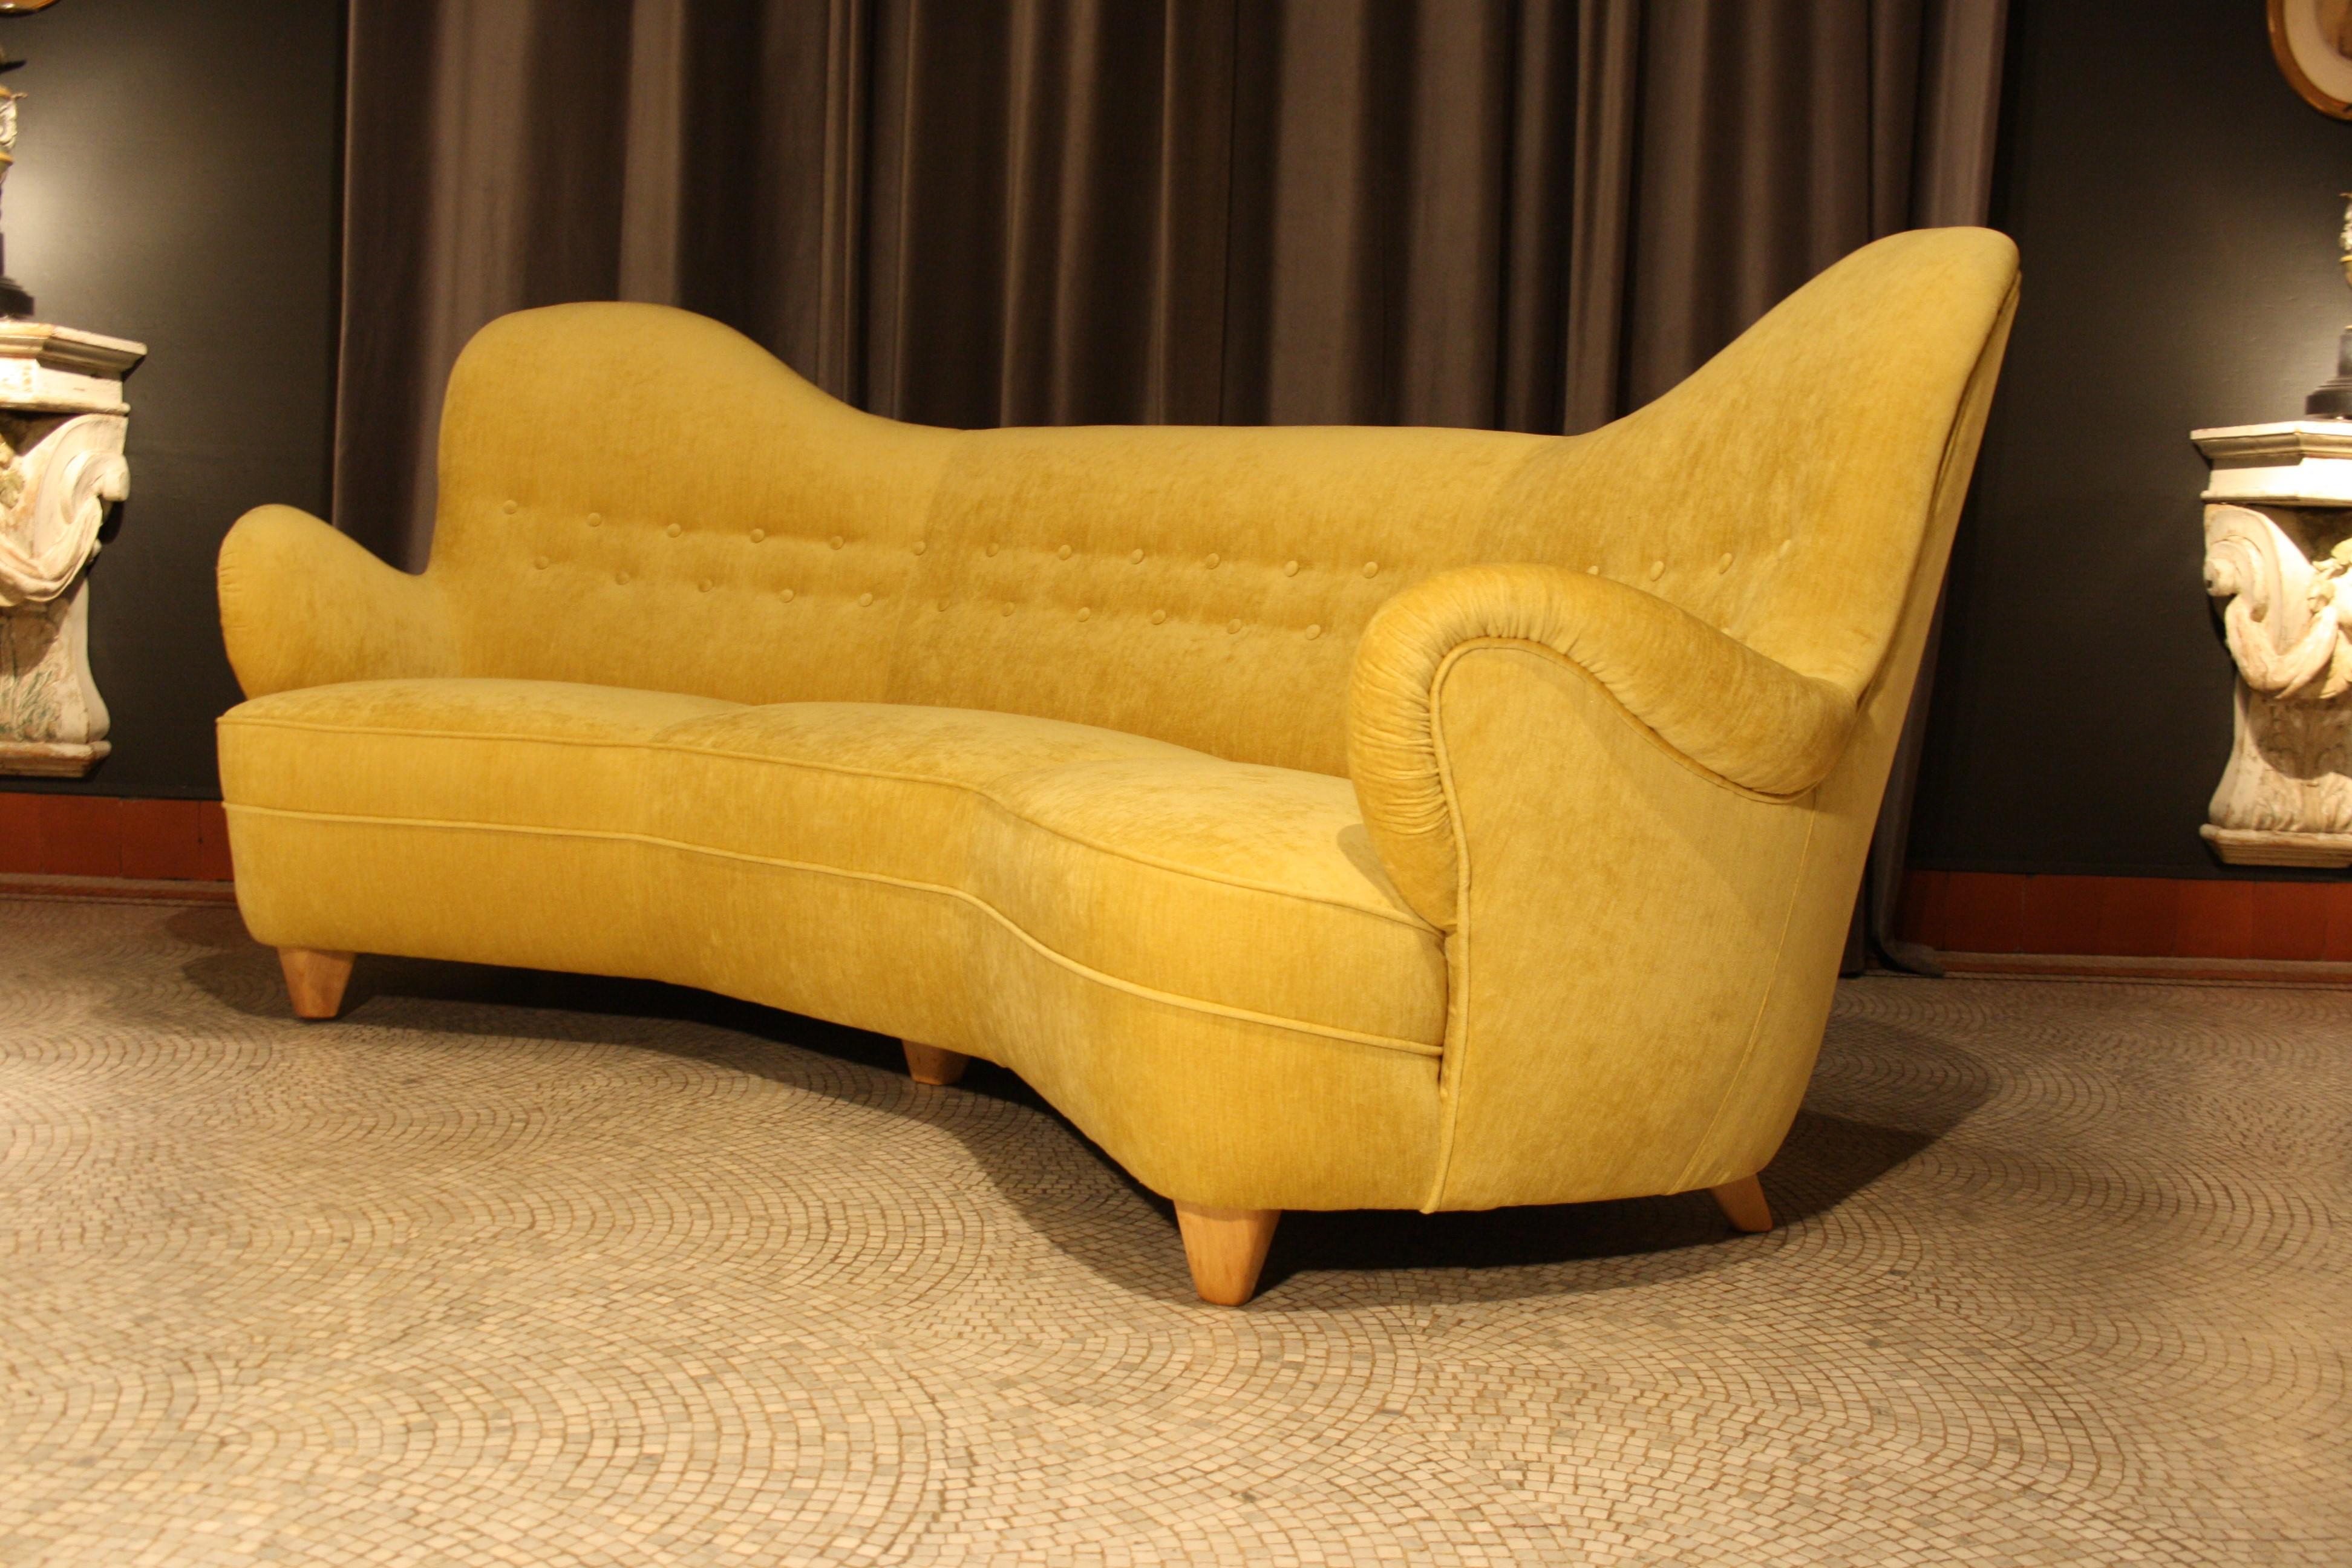 An unique high back banana sofa from the Architect Otto Schultz, completely new upholstered with a mustard yellow
color French quality velvet fabric.
An Avant Garde design made in a traditional way, completely handmade wooden construction.

An